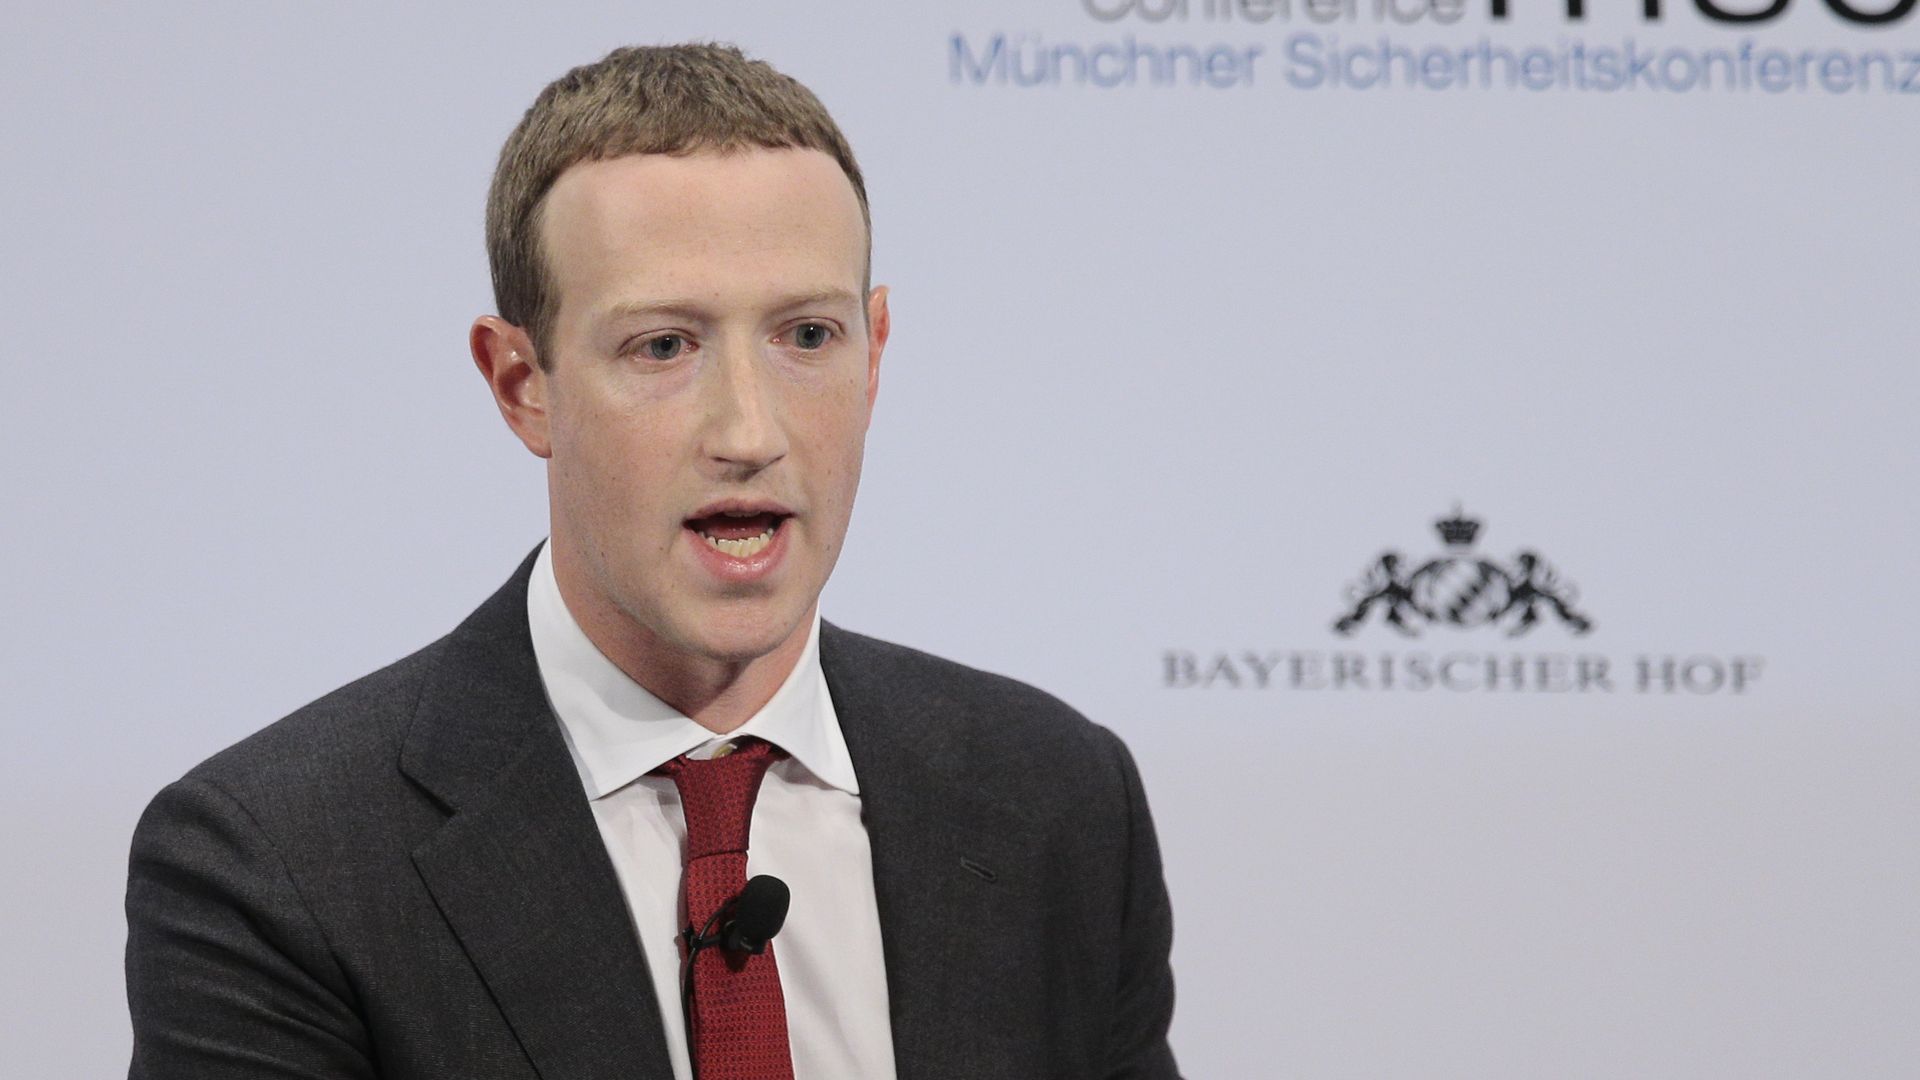 Mark Zuckerberg attending the 56th Munich Security Conference in Germany